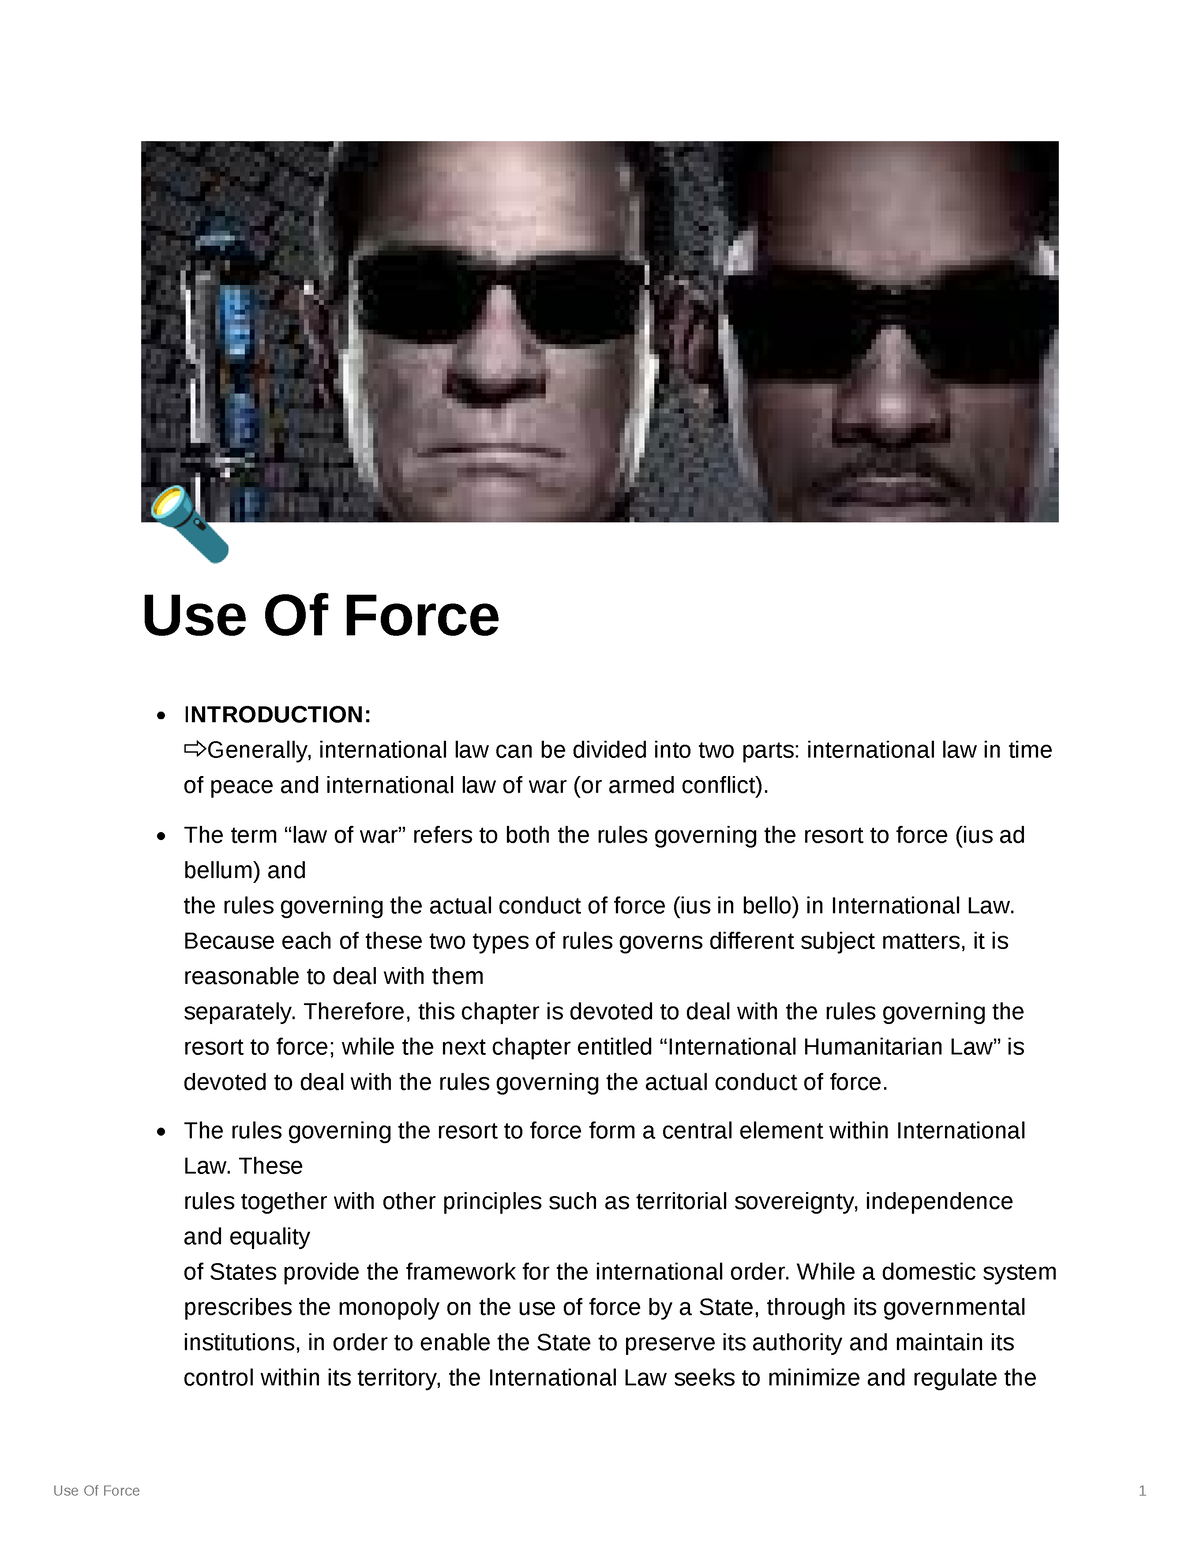 Use Of Force in Public International Law 🔦 Use Of Force INTRODUCTION